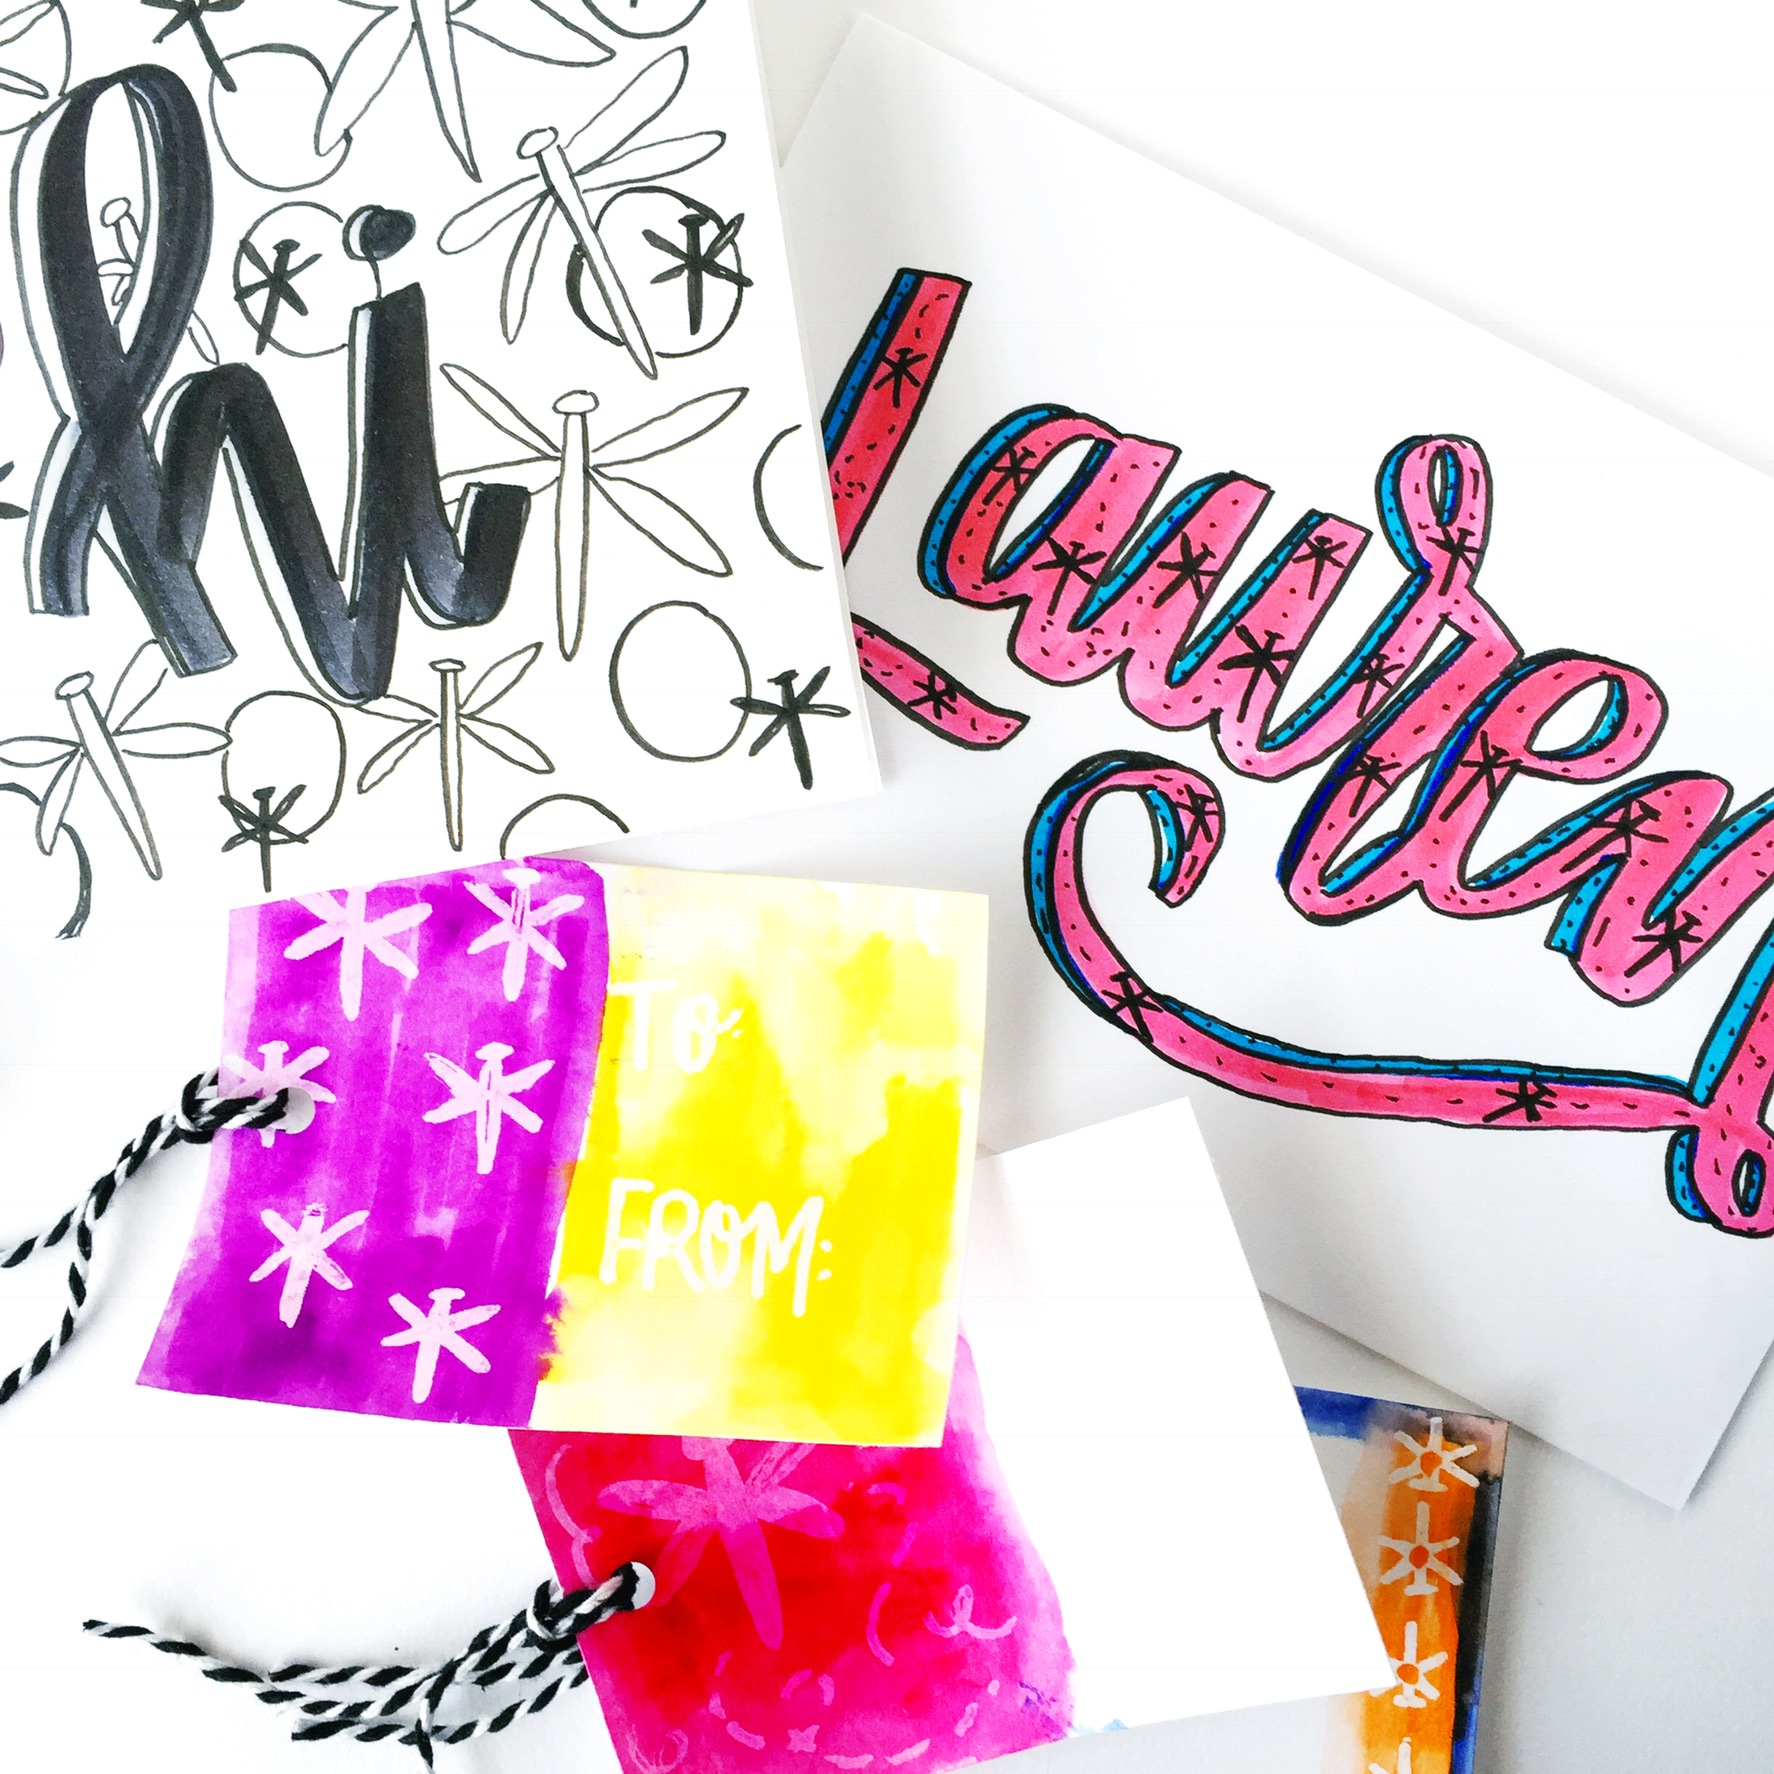 Use @TombowUSA products to create fun lettering projects inspired by dragonflies. @Renmadecalligraphy gives you lettering tips and tricks in this fun step-by-step tutorial that you can make your own!